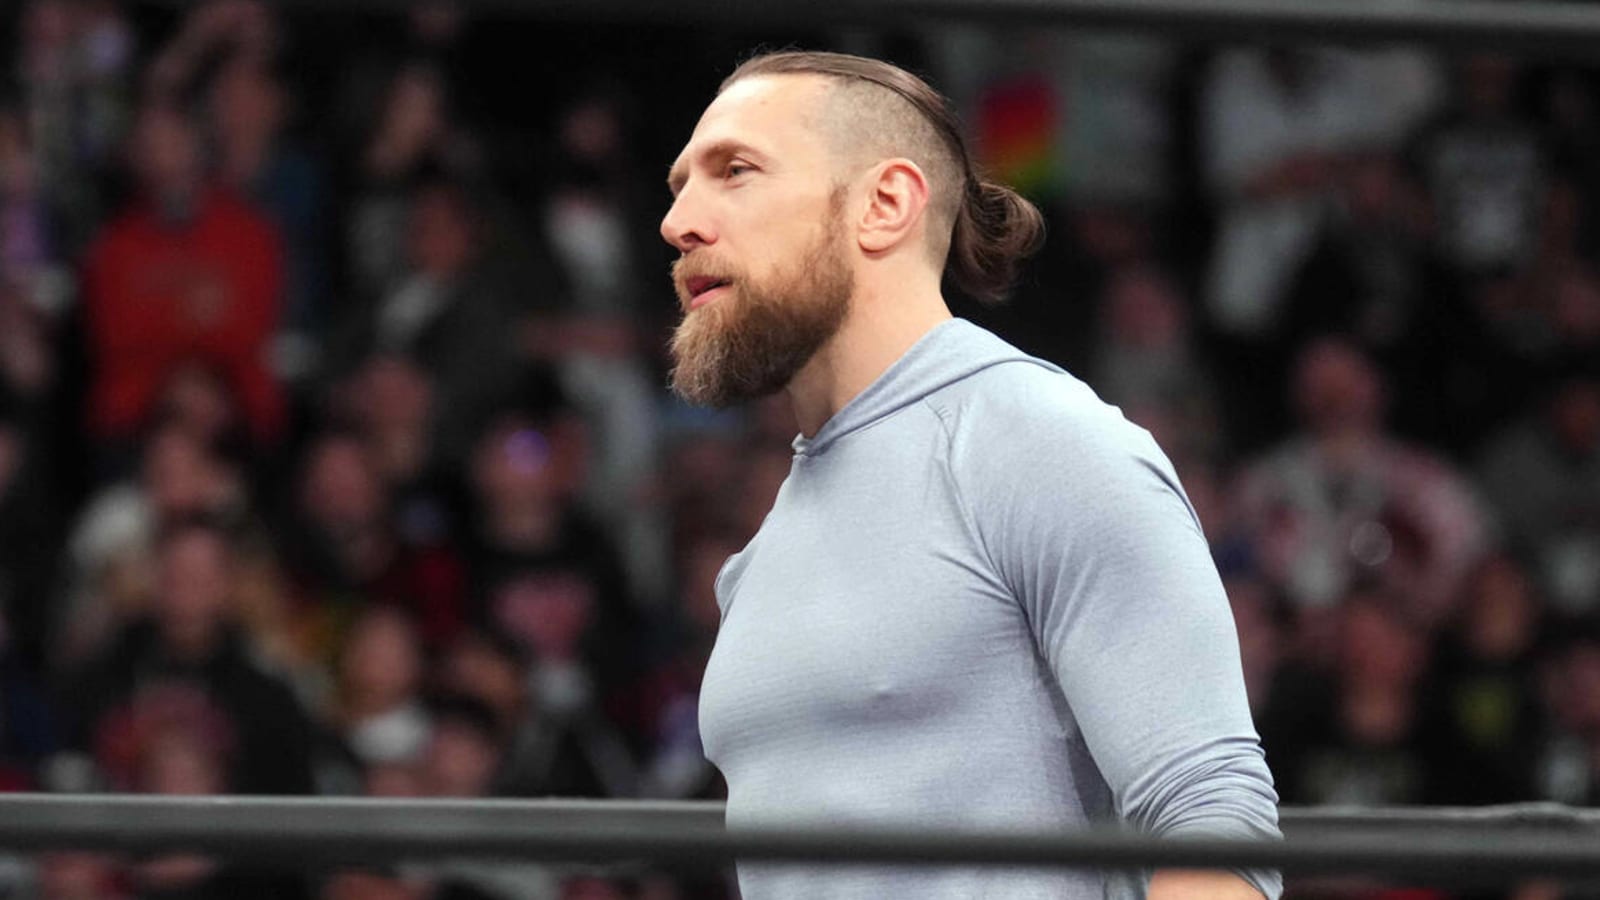 Bryan Danielson reveals when his AEW contract is up